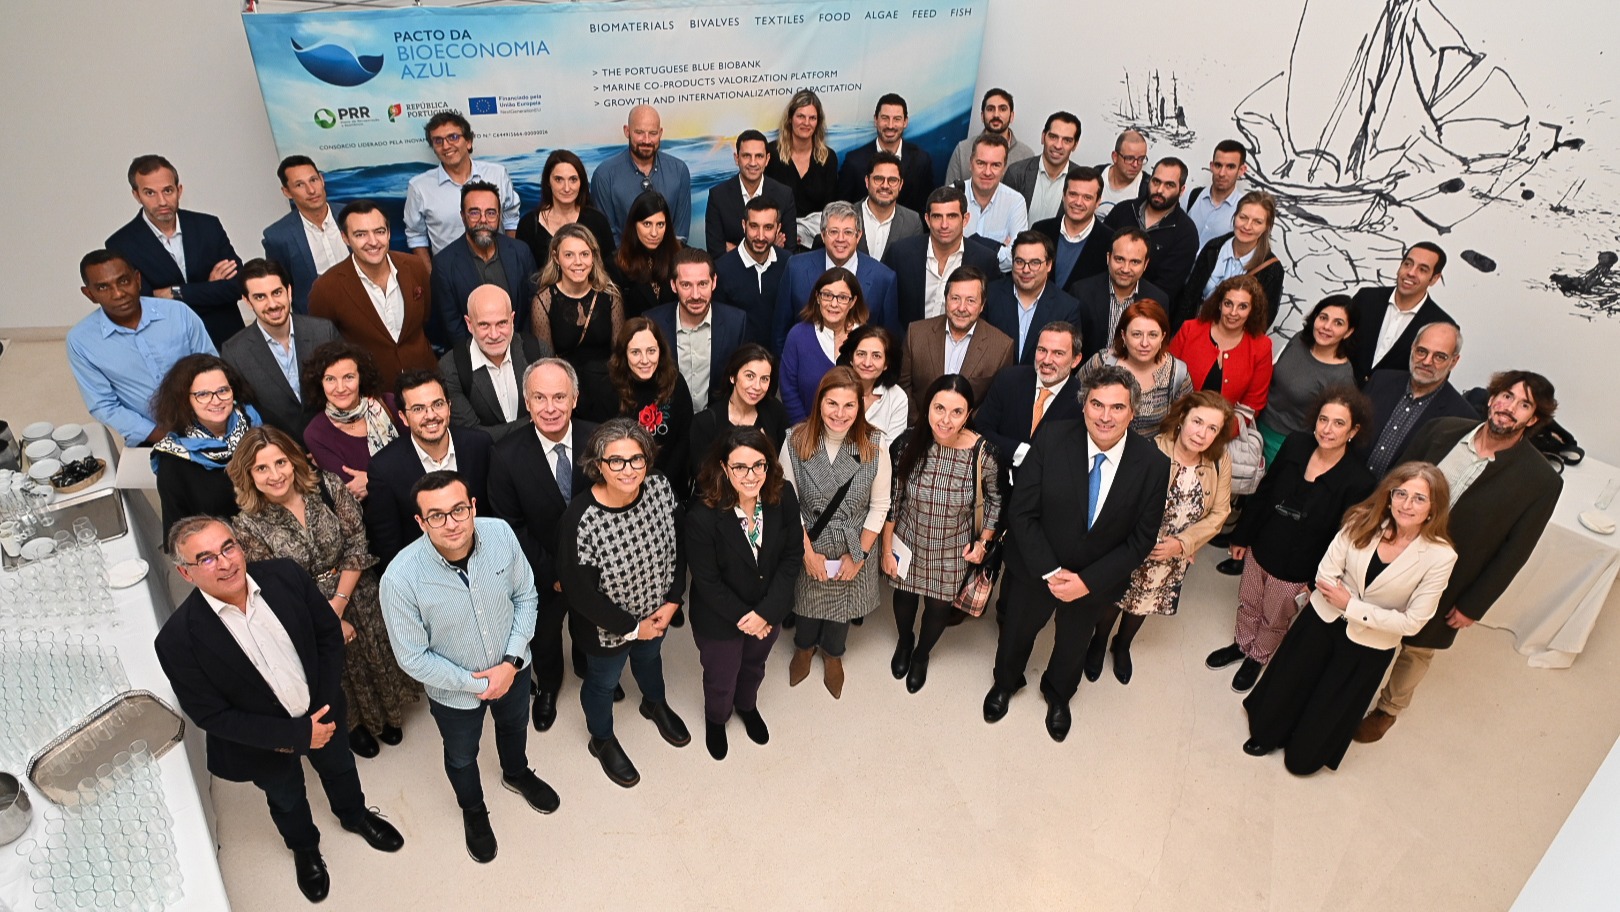 Biannual Meeting of the Blue Bioeconomy Pact